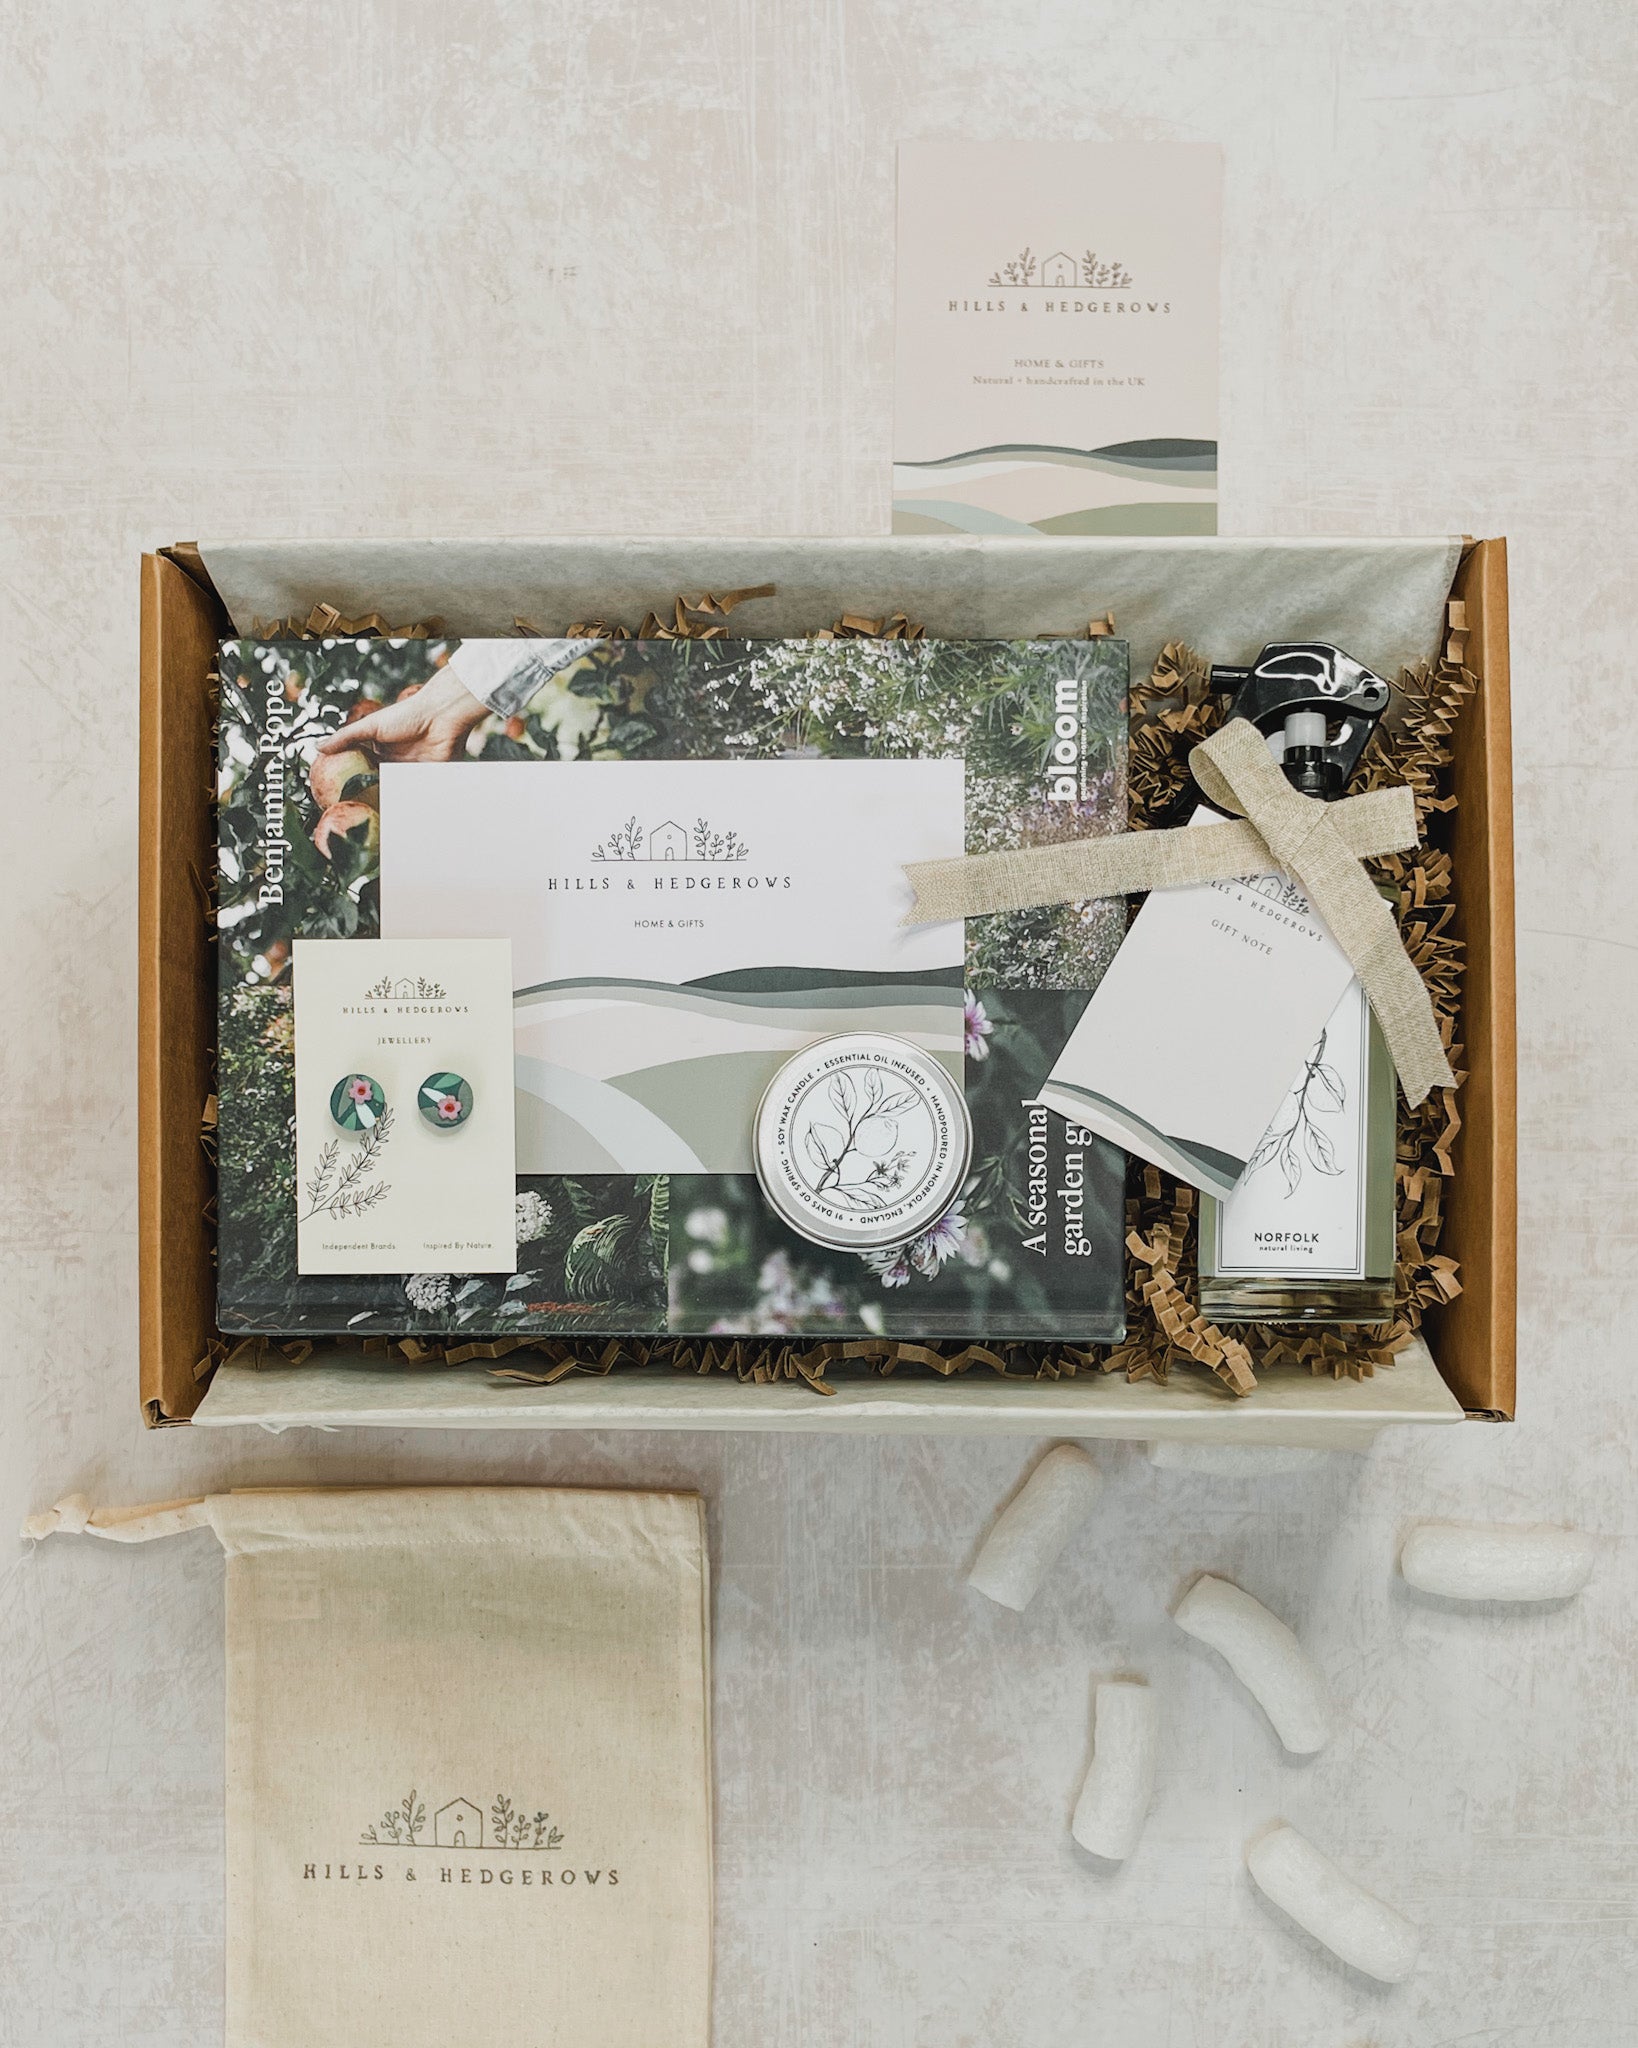 Handcrafted, eco-friendly gifts and home decor items inspired by the English countryside from the Thoughtful Gift Collection.